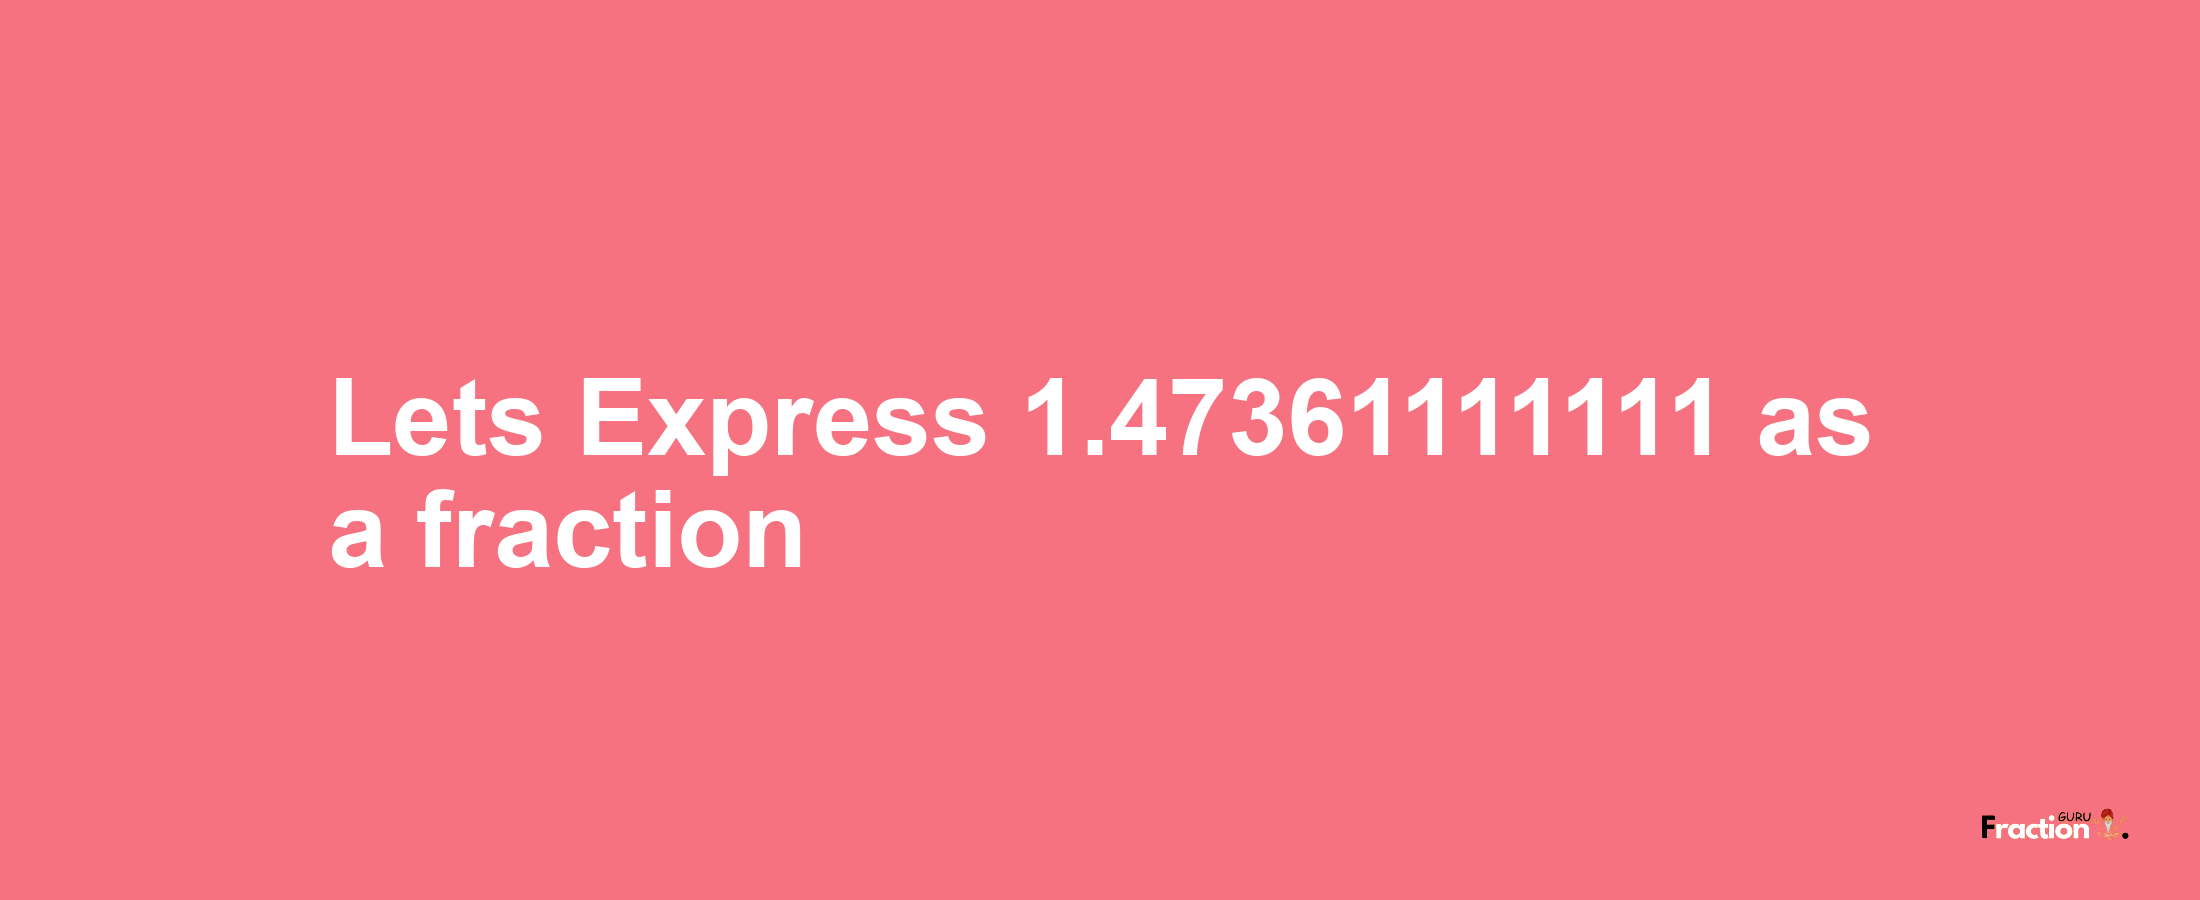 Lets Express 1.47361111111 as afraction